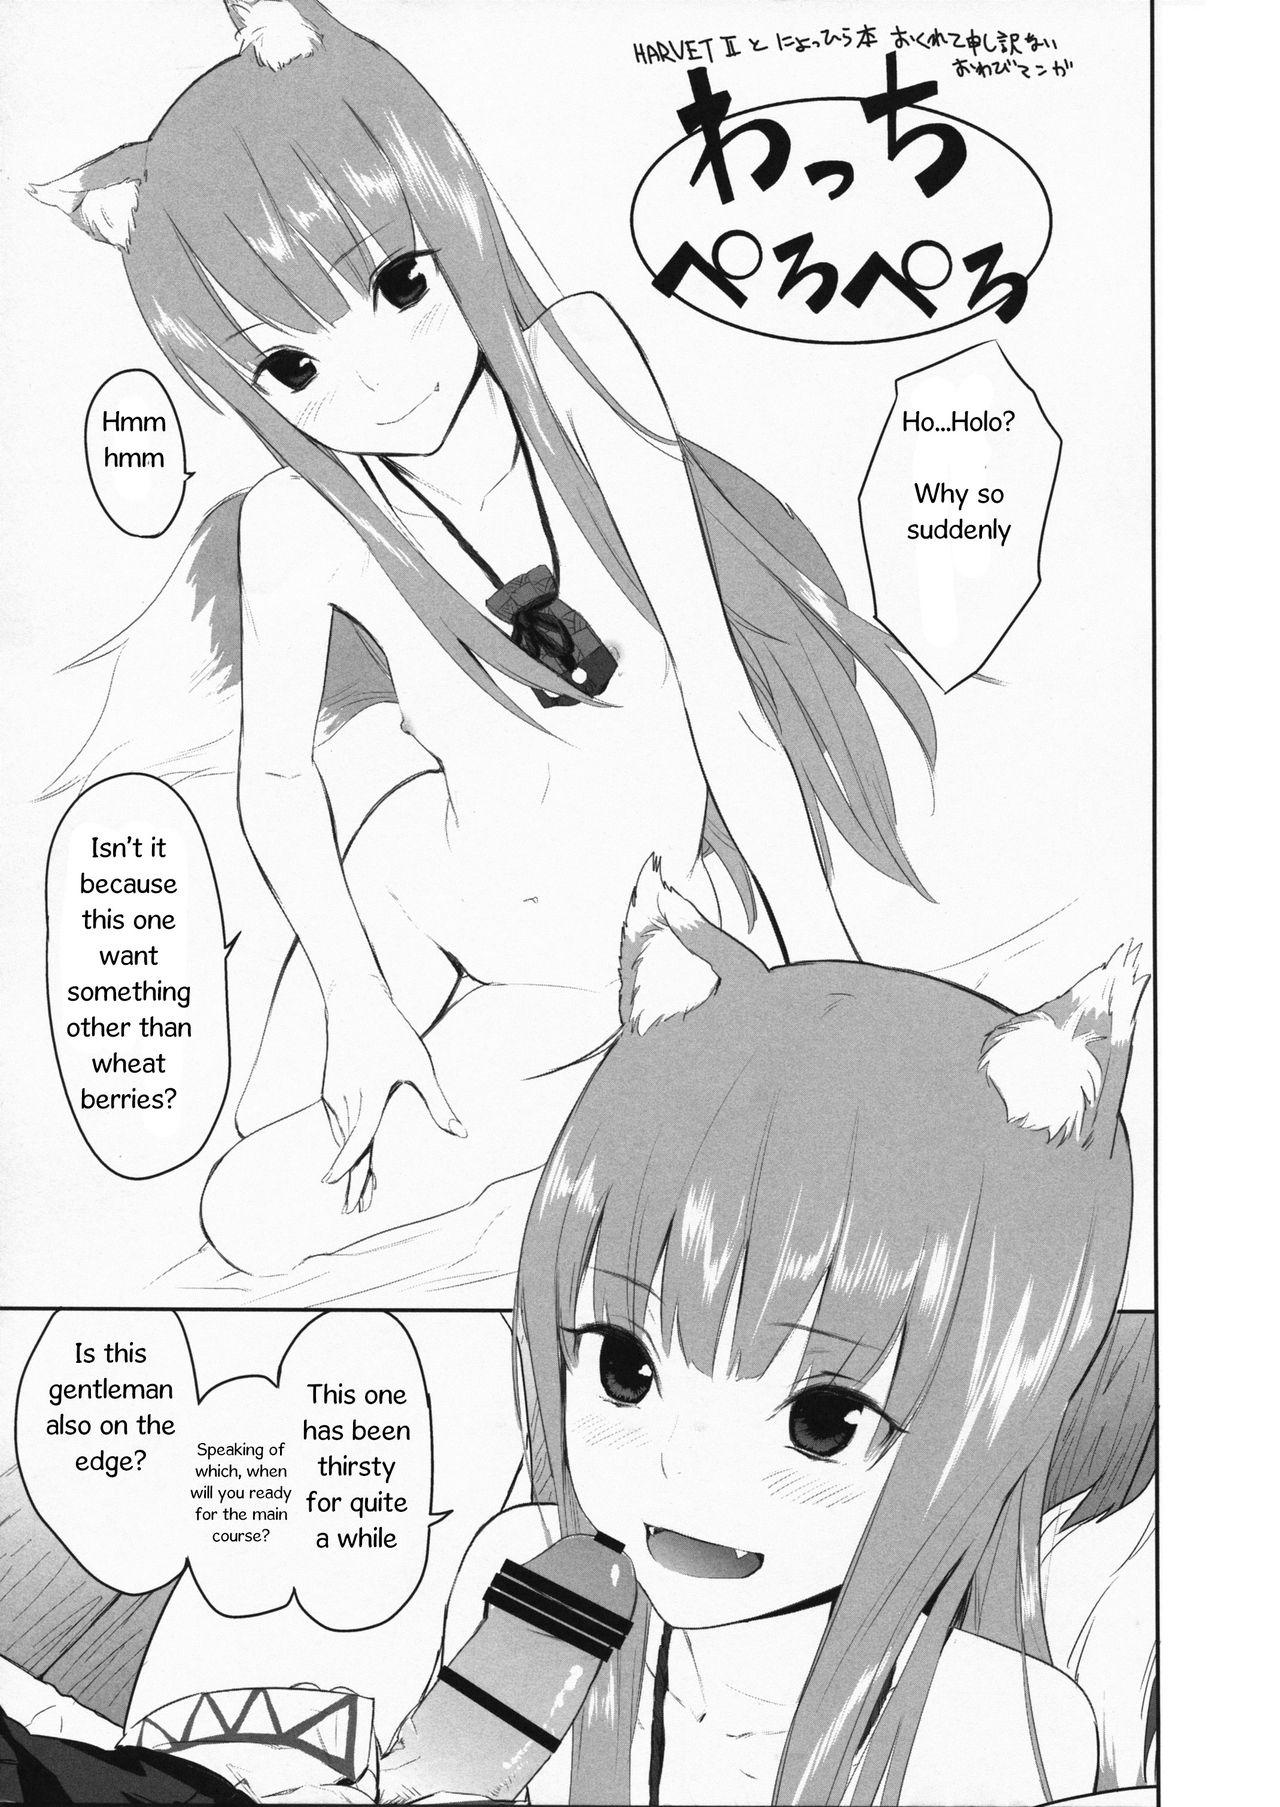 Whooty Ajisai Maiden vol.1 - Code geass Spice and wolf Un-go Gaygroup - Page 11